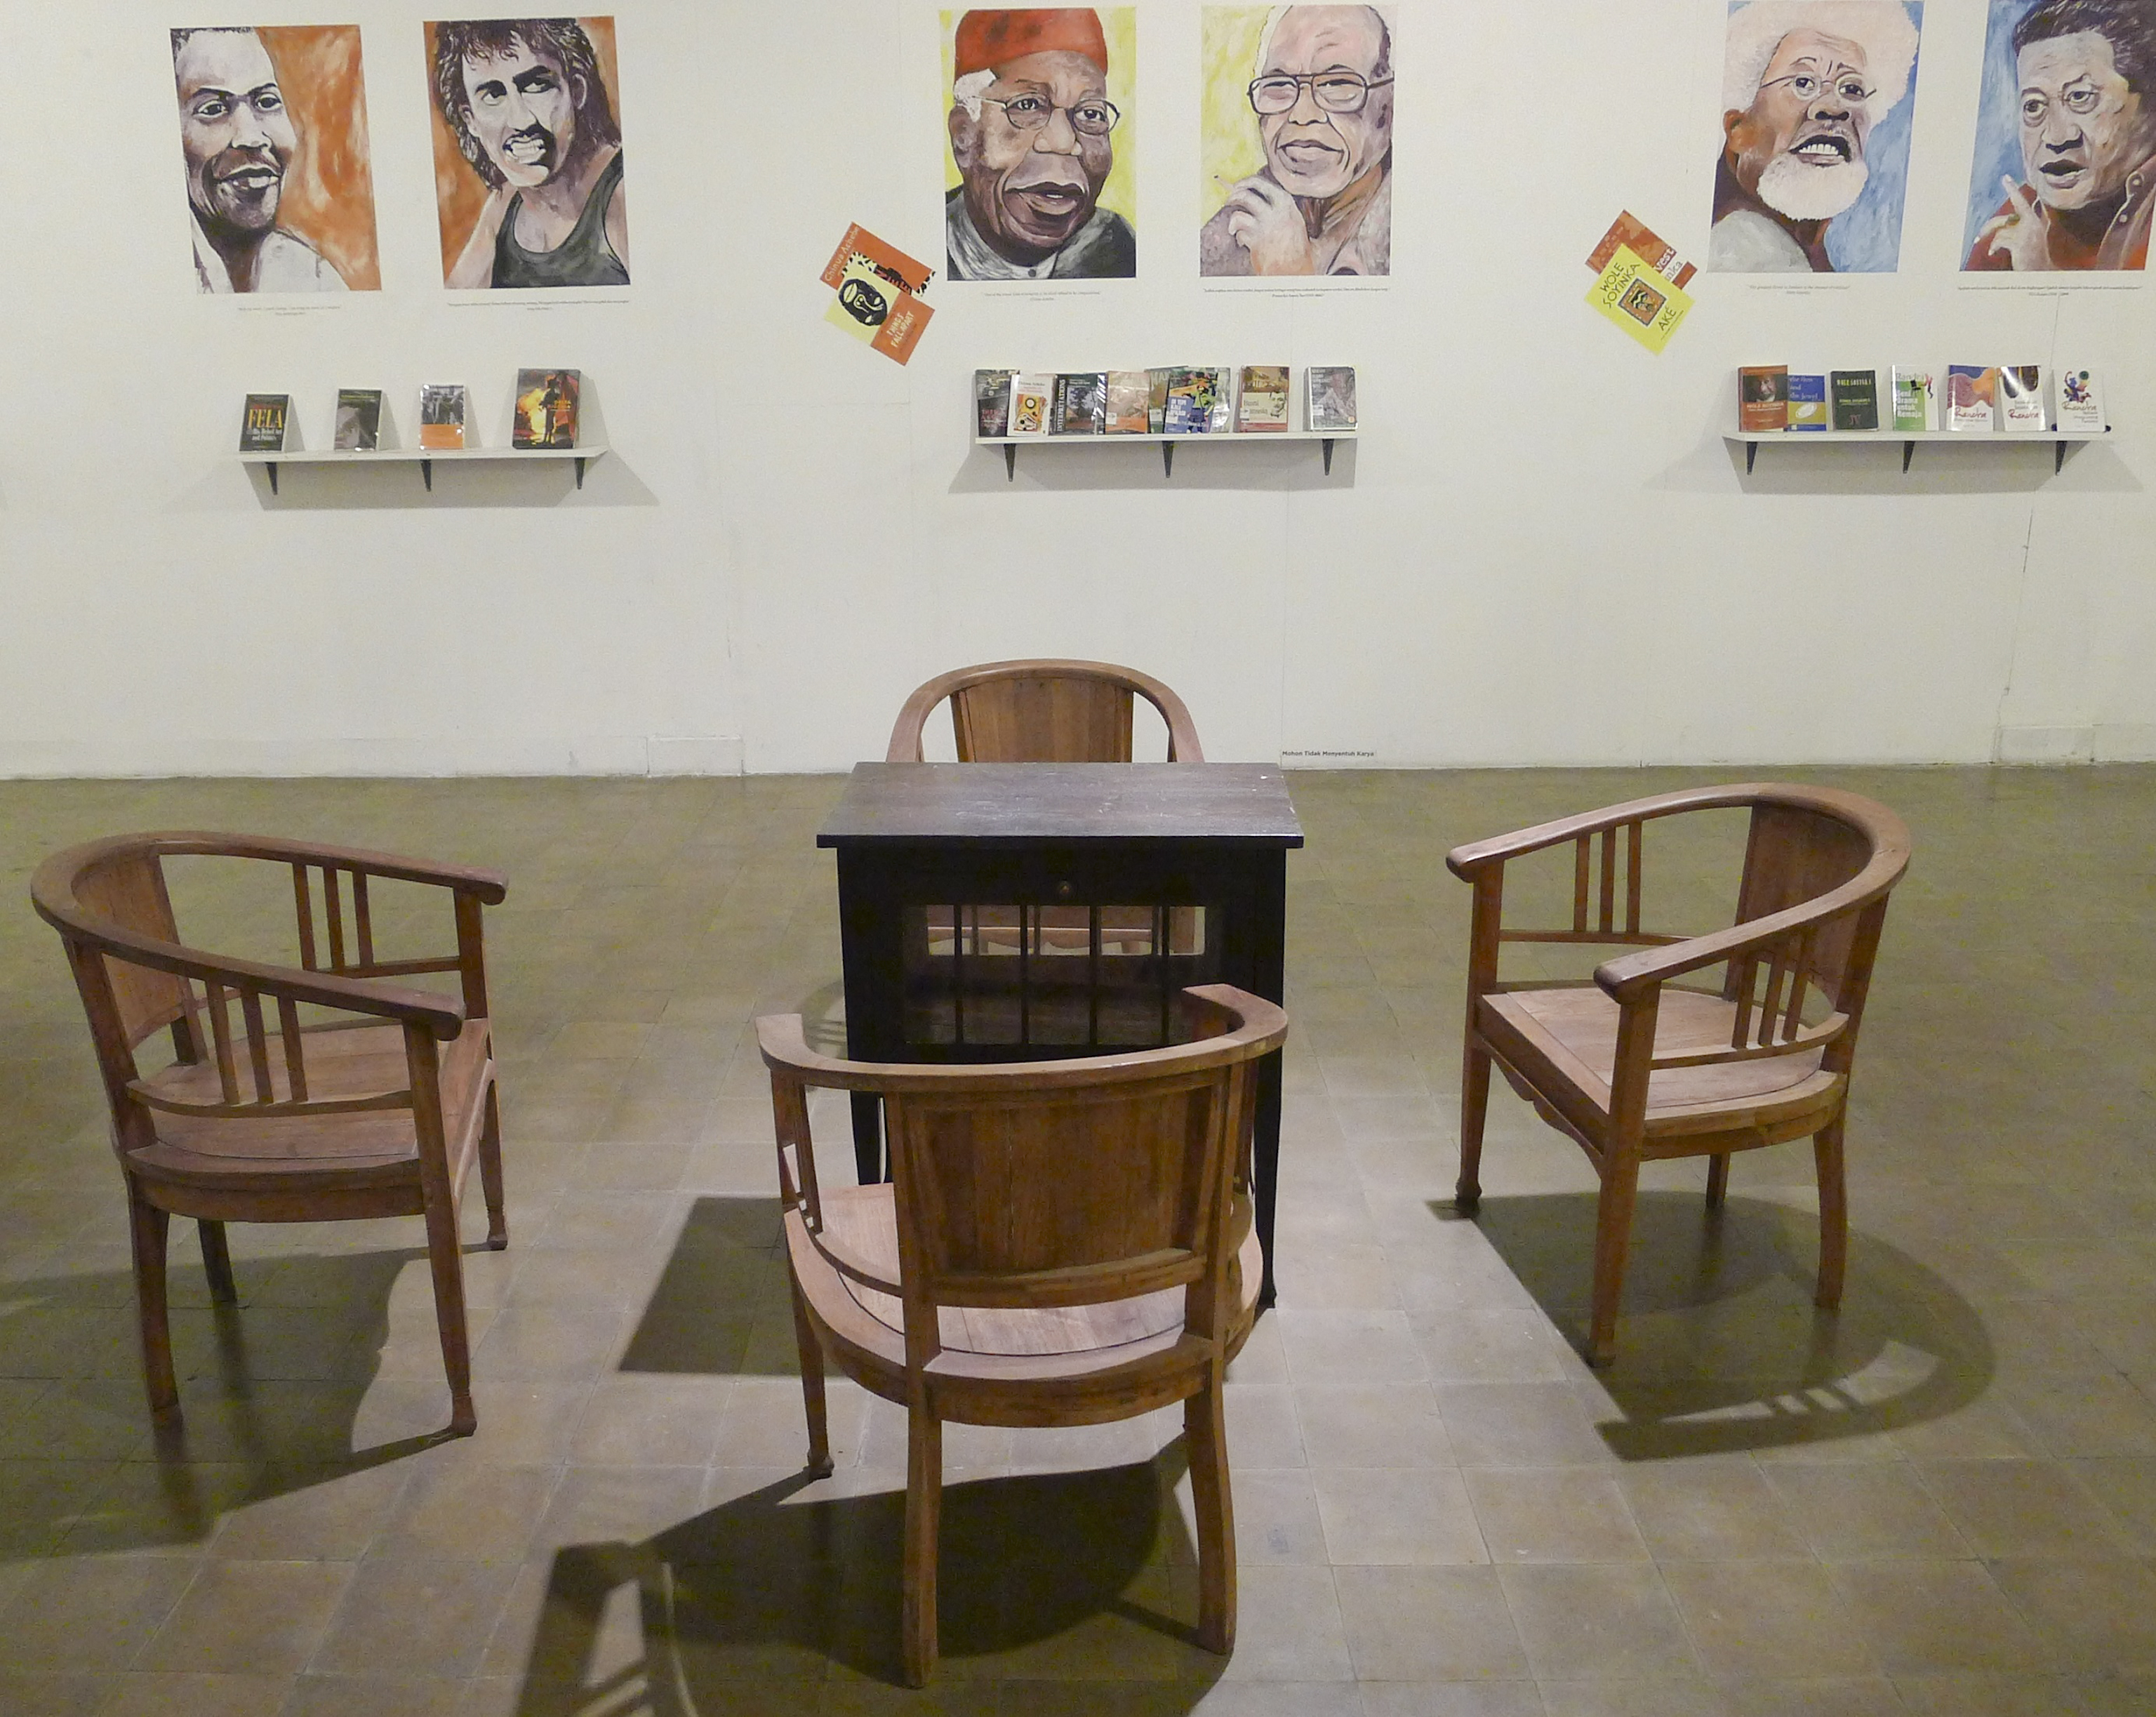 This handout image show Library & information room about Nigeria showing writers' portraits at the Jogya Biennale 2015. Credit: JOHN BATTEN [06DECEMBER2015 THE REVIEW ARTS SECOND]